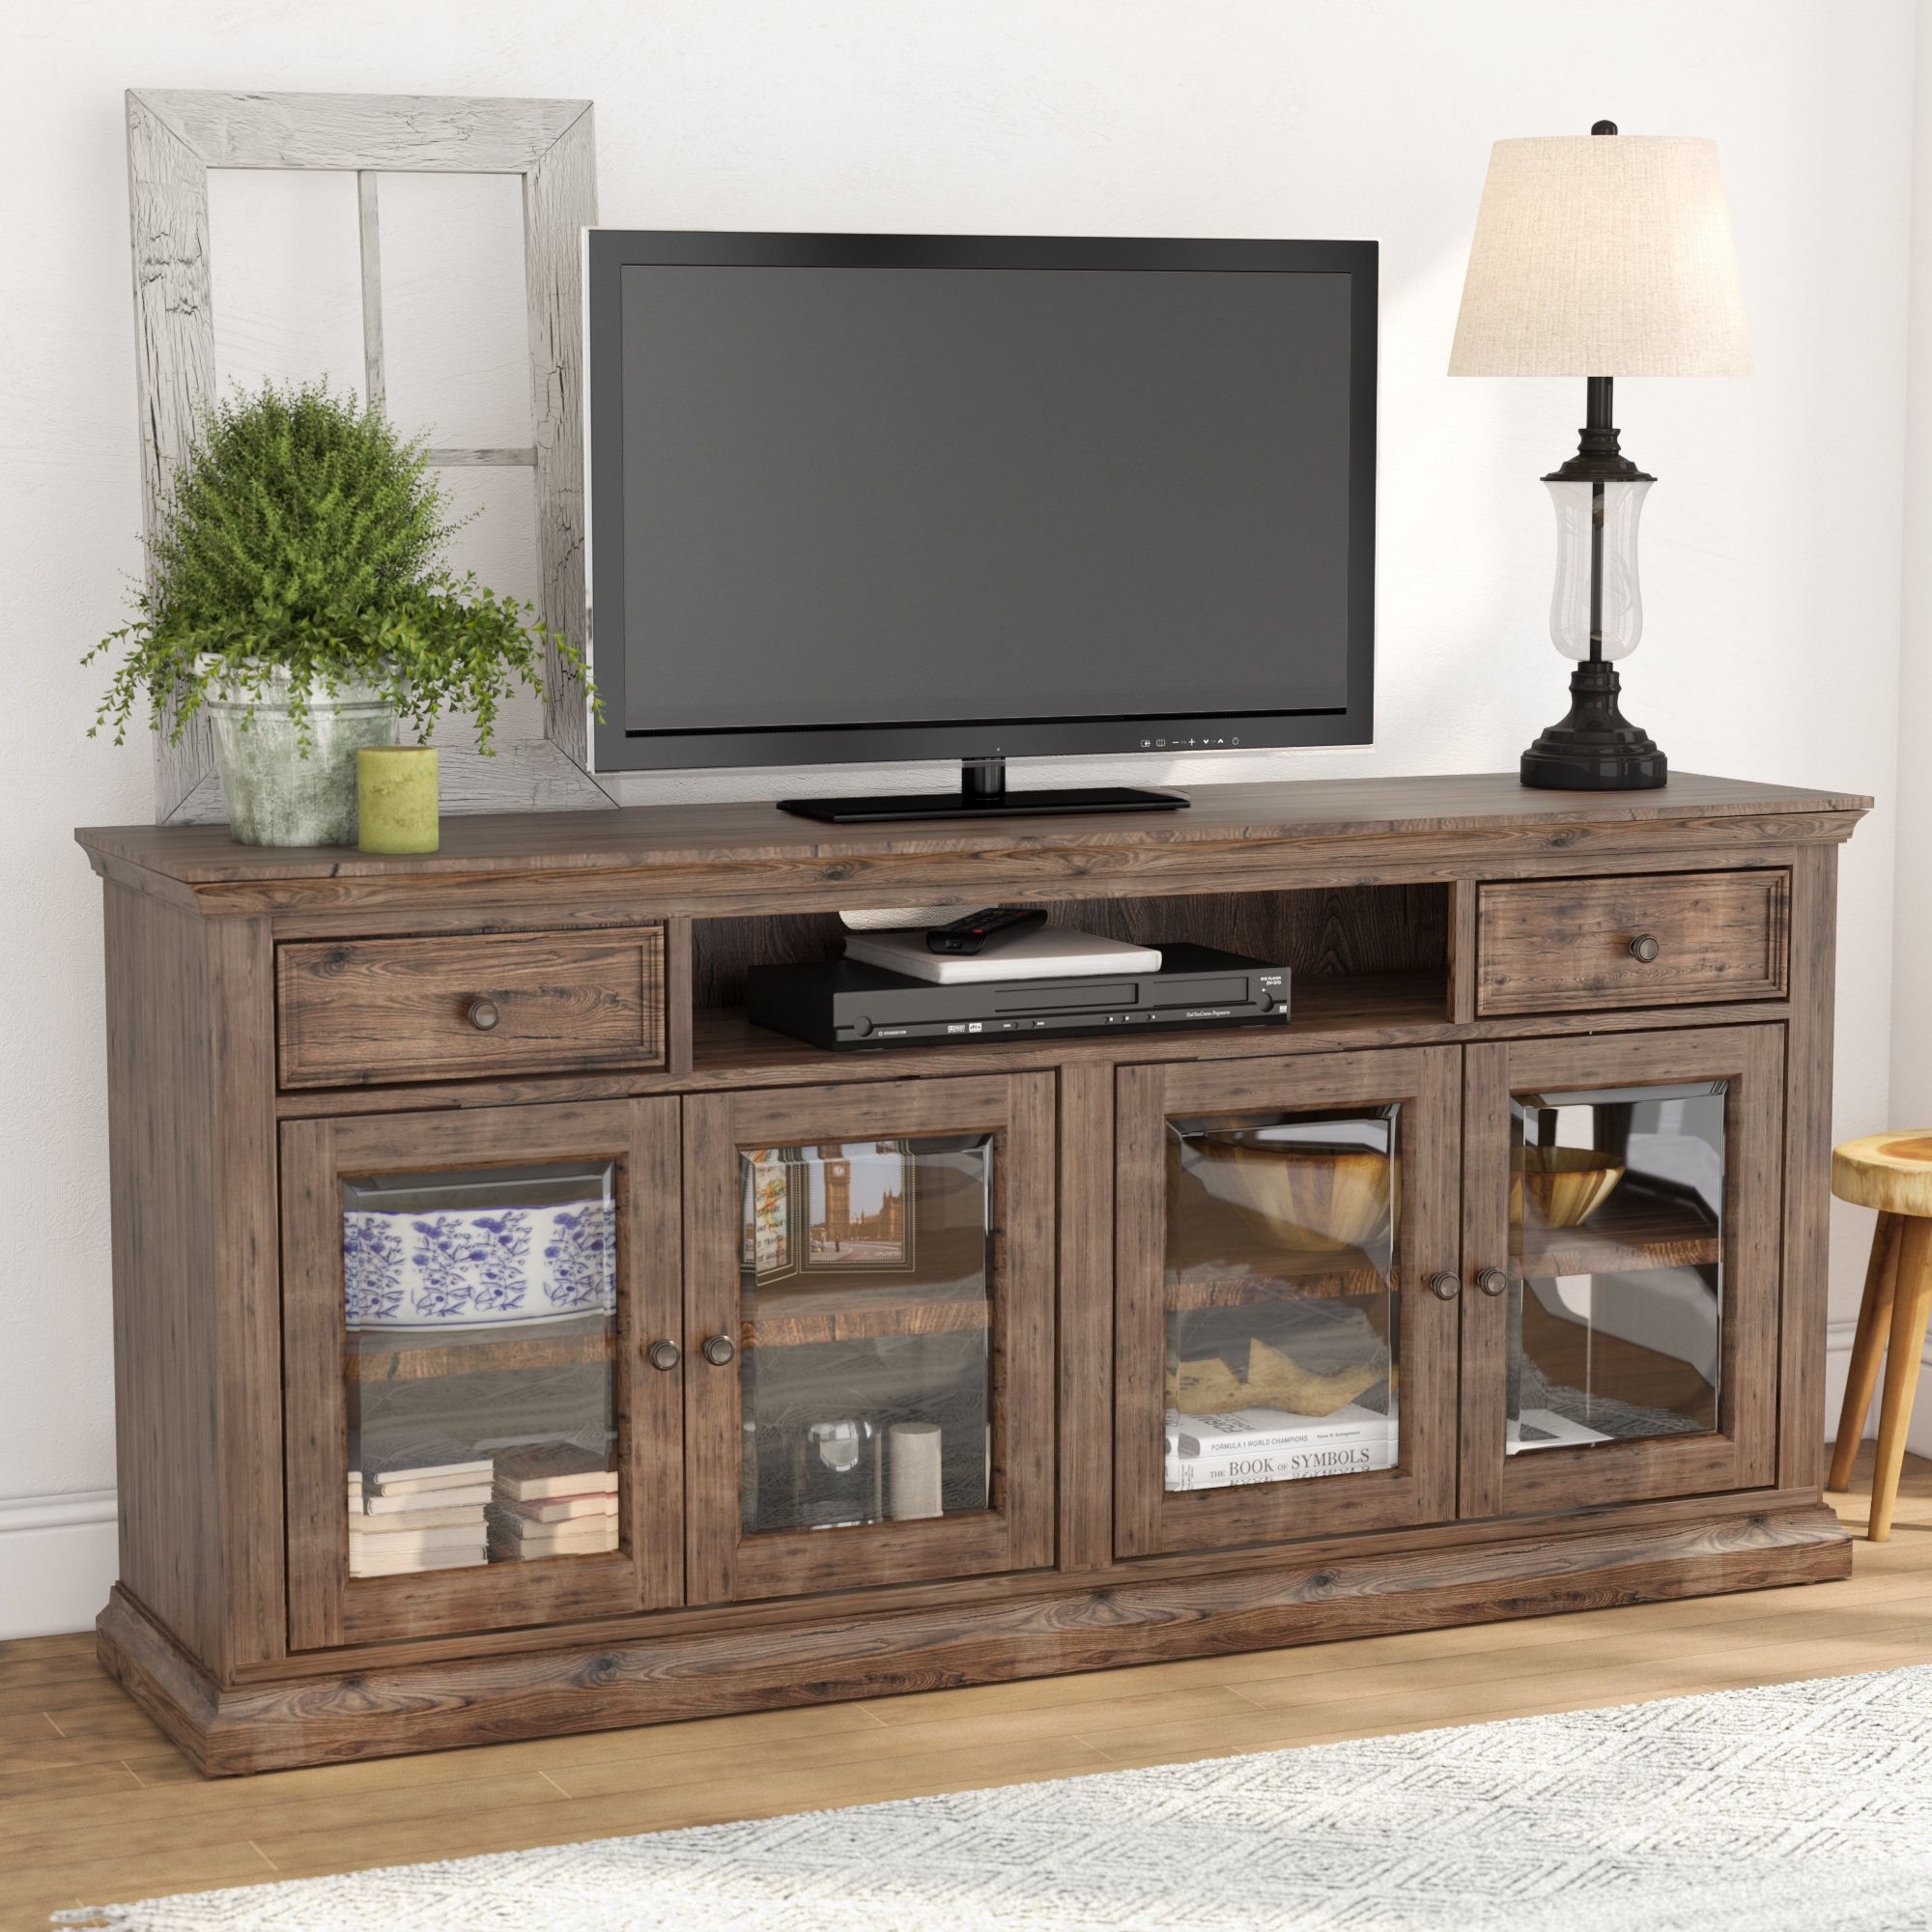 Laurel Foundry Modern Farmhouse Sainte Rose Tv Stand For Tvs Up To Within Valencia 60 Inch Tv Stands (View 25 of 30)